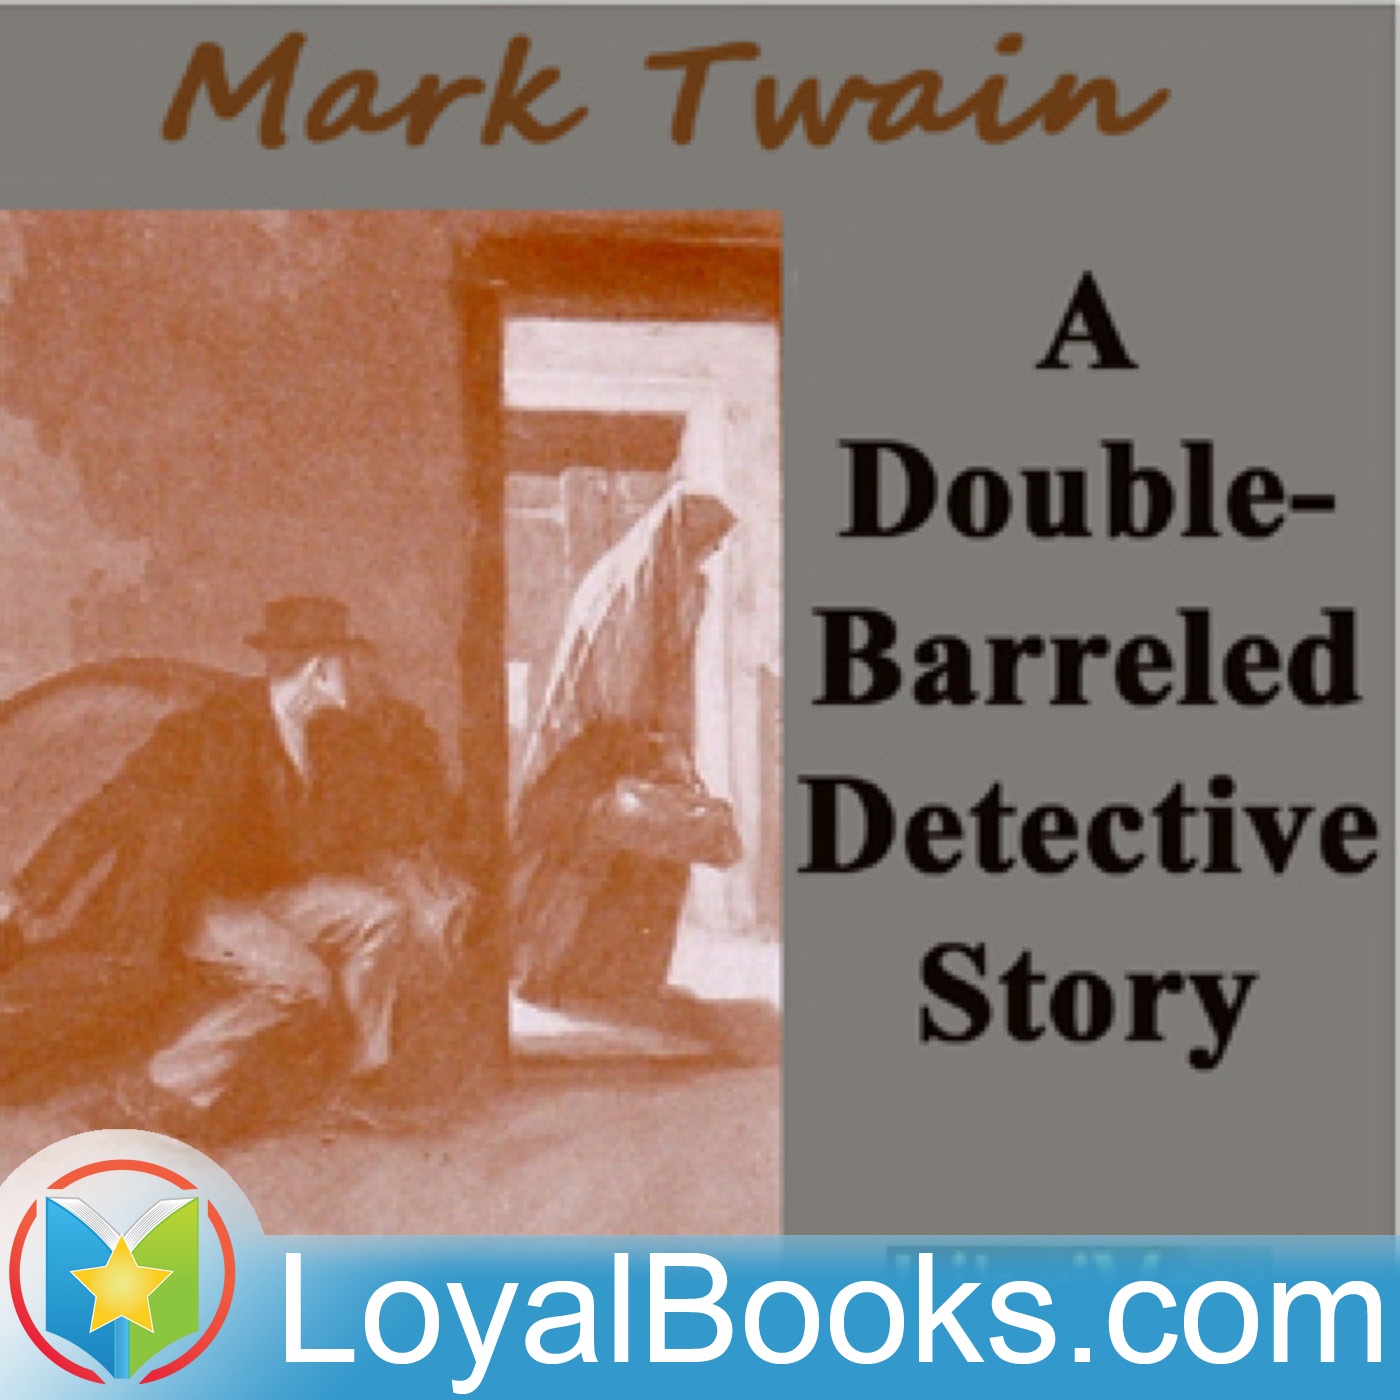 Image result for 'Double- barreled detective story